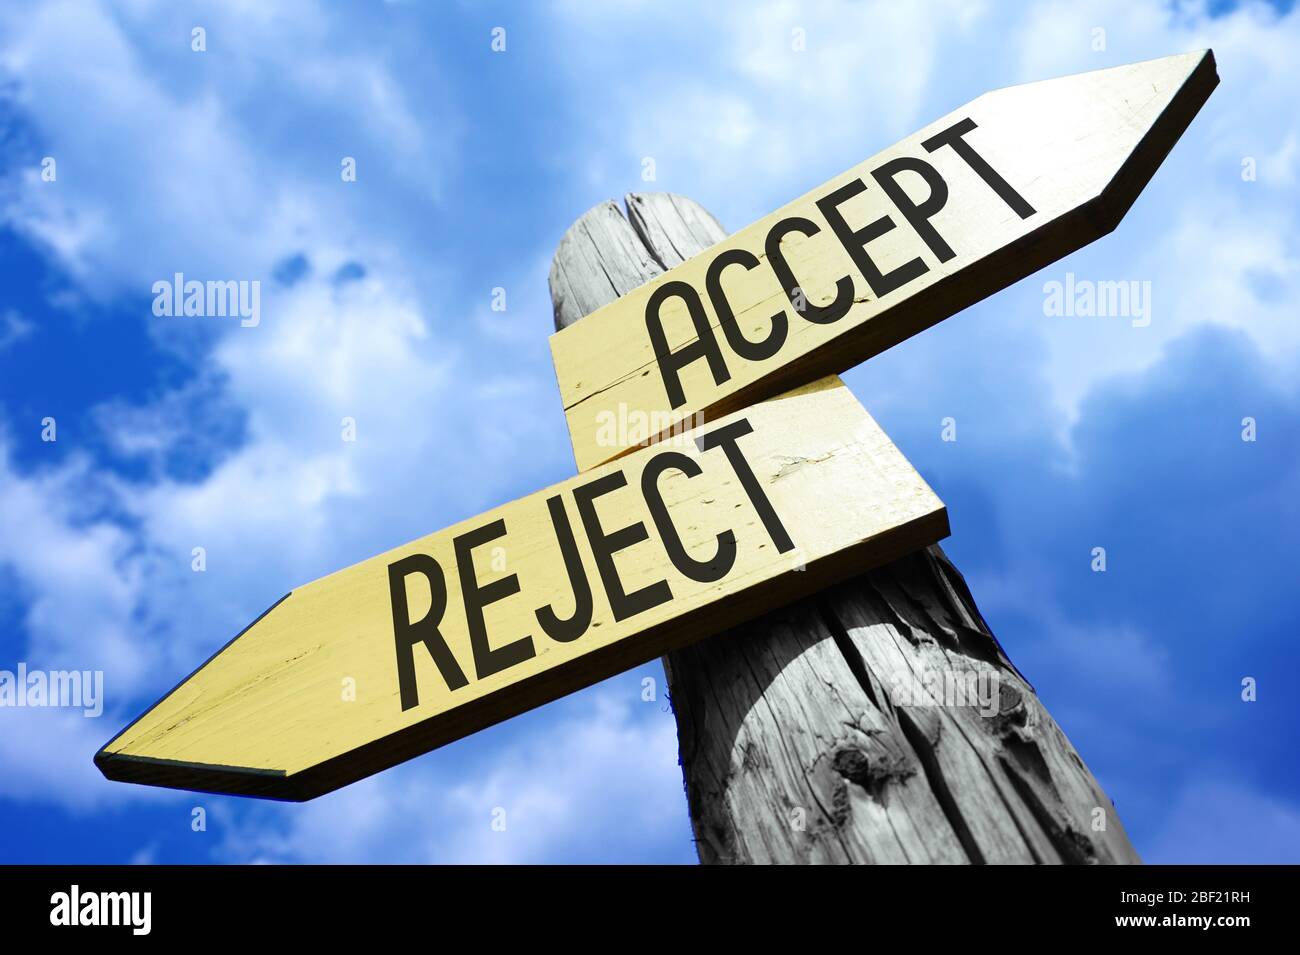 Accept, reject - wooden signpost Stock Photo